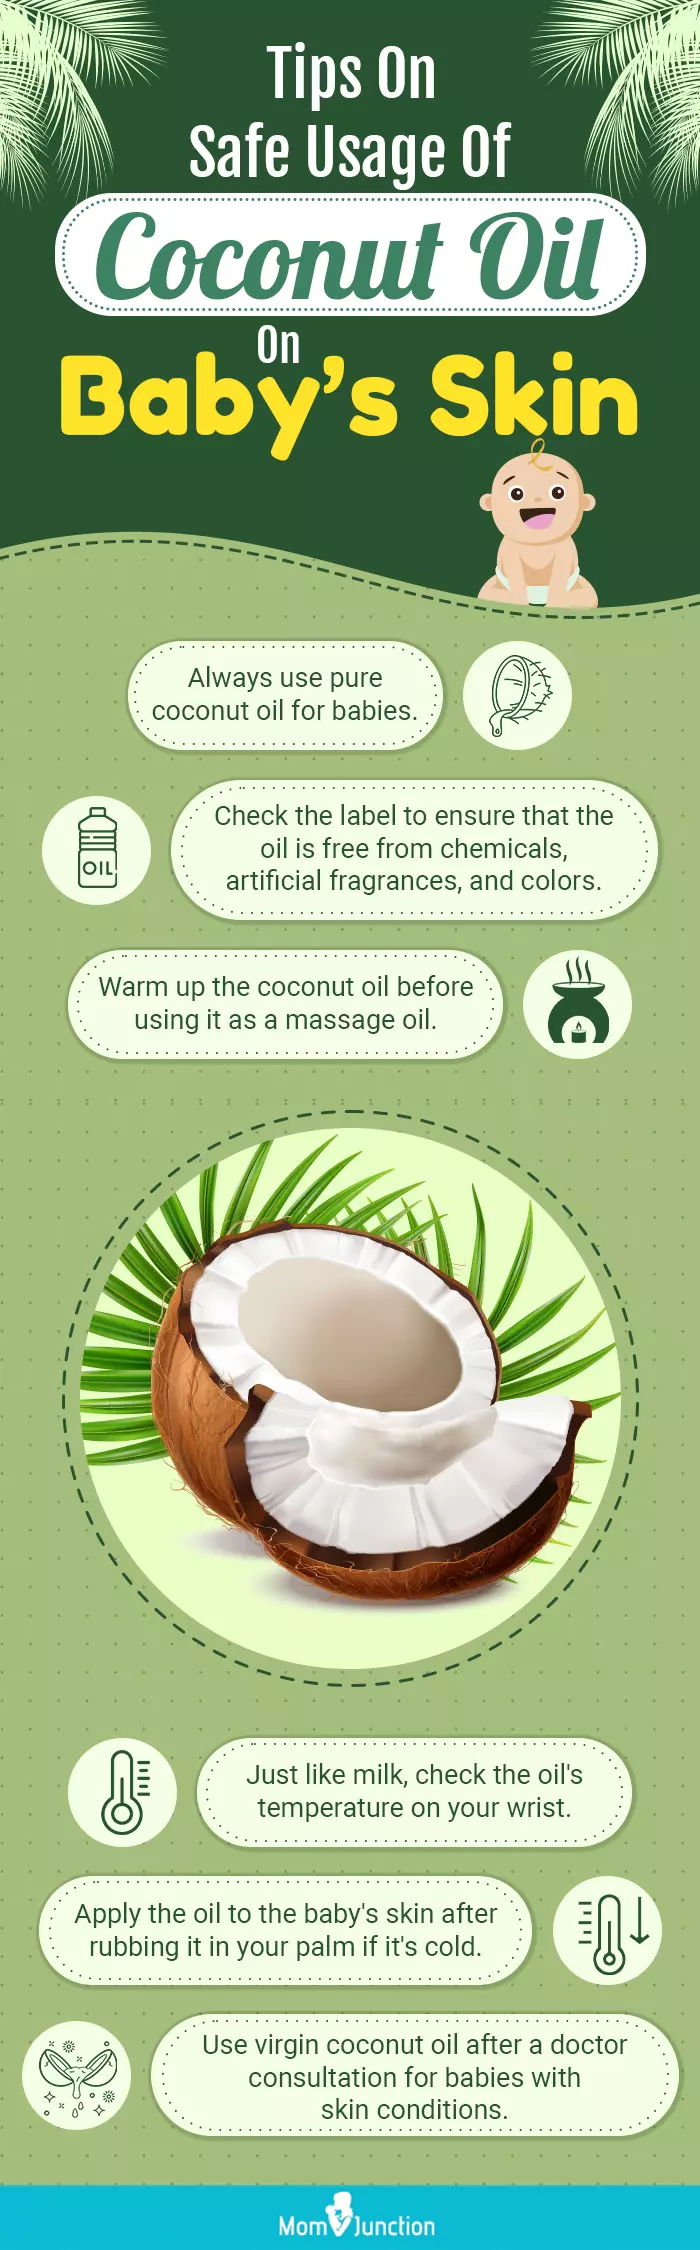 tips on safe usage of coconut oil on baby’s skin (infographic)